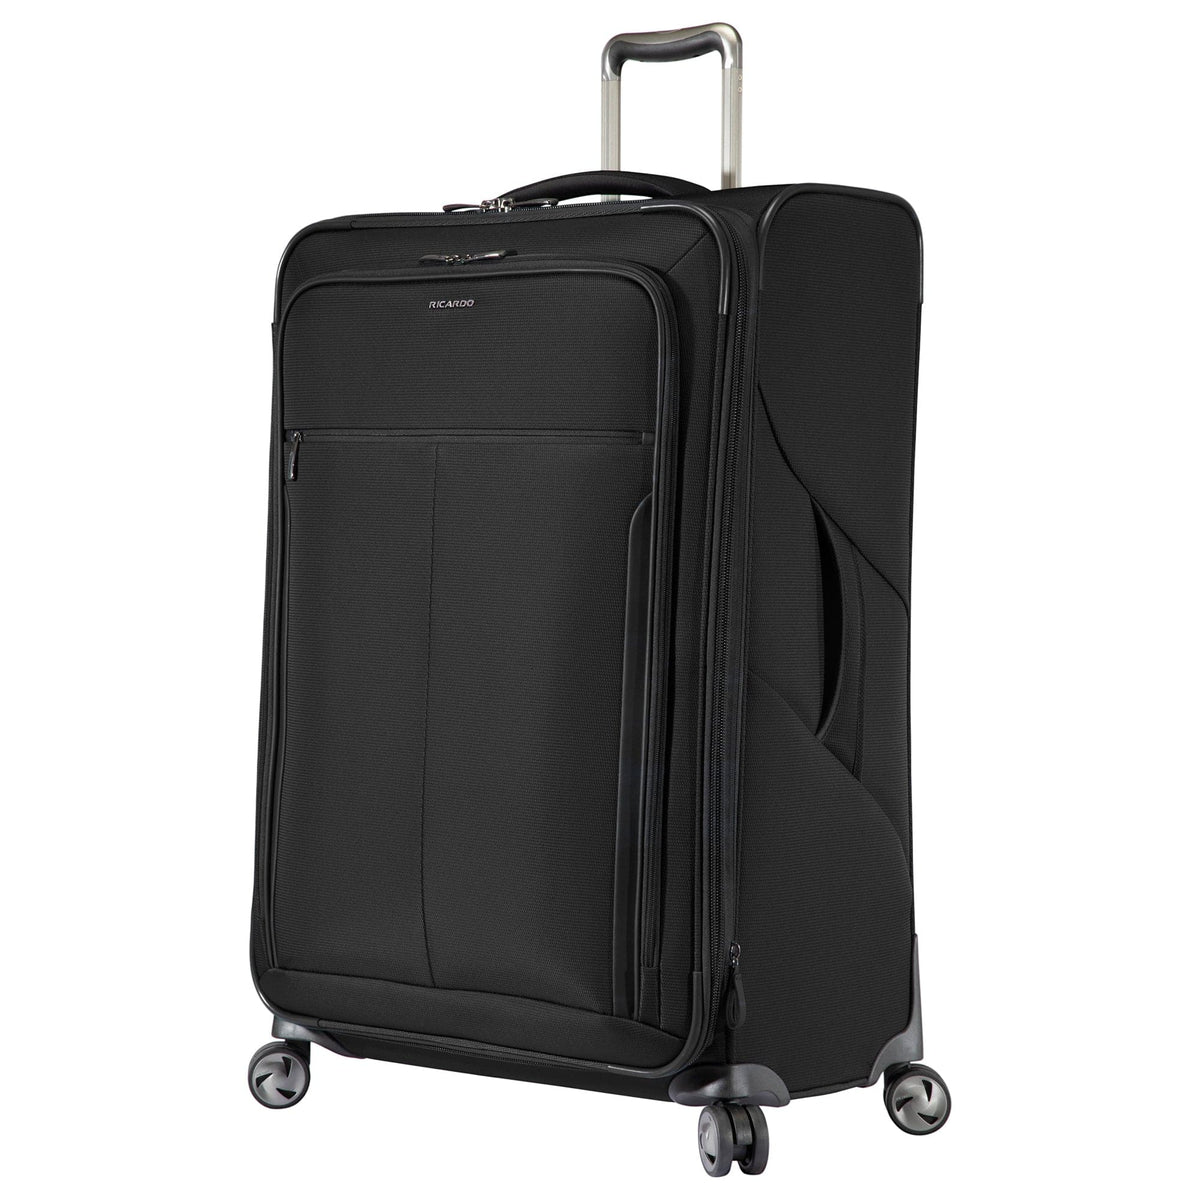 Ricardo Beverly Hills Seahaven 2.0 Large Check-In Luggage